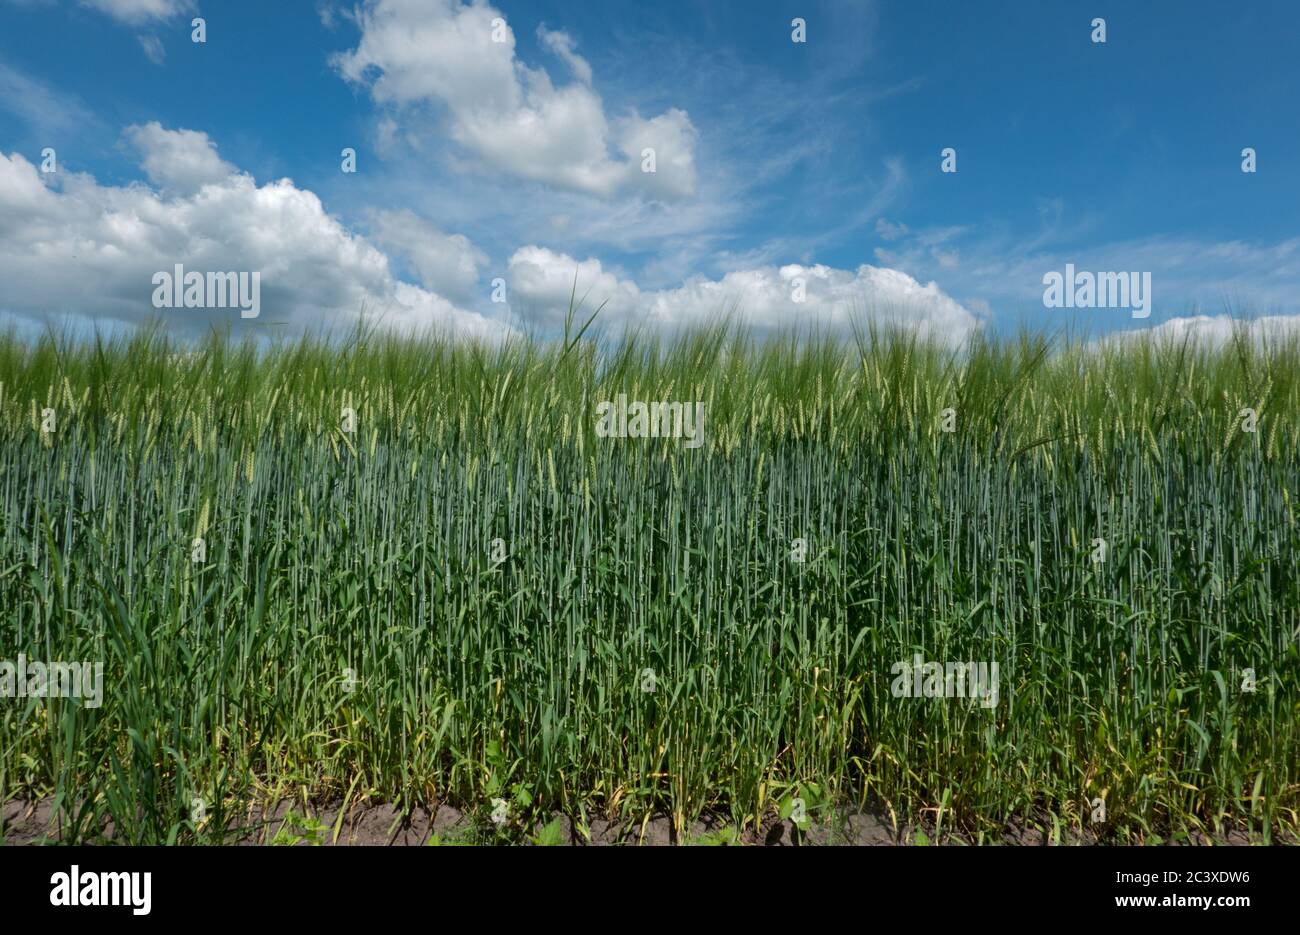 Field of green, unripe Barley, Hordeum vulgare, under a blue sky with clouds Stock Photo